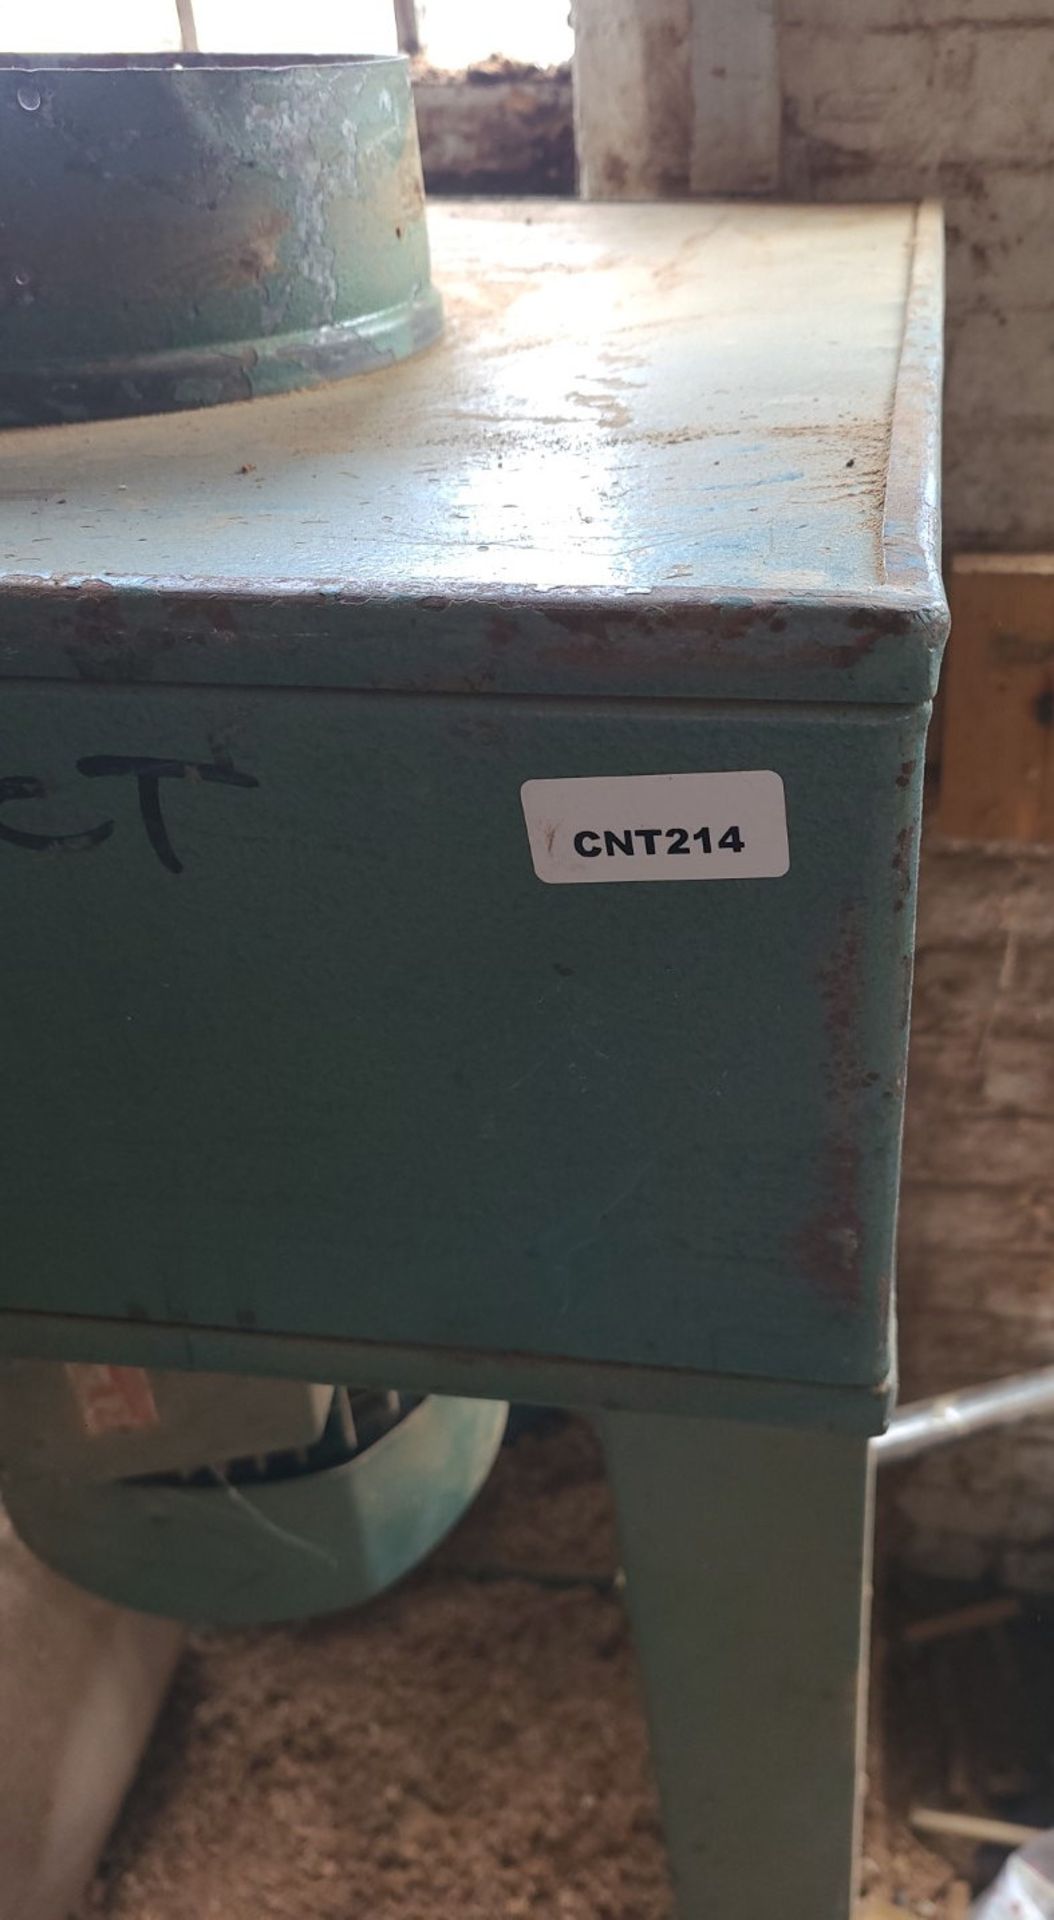 1 x 4-Bag Dust And Wood Waste Extractor/Collector - 3 Phase - Ref: CNT214 - CL846 - Location: Oxford - Image 4 of 22